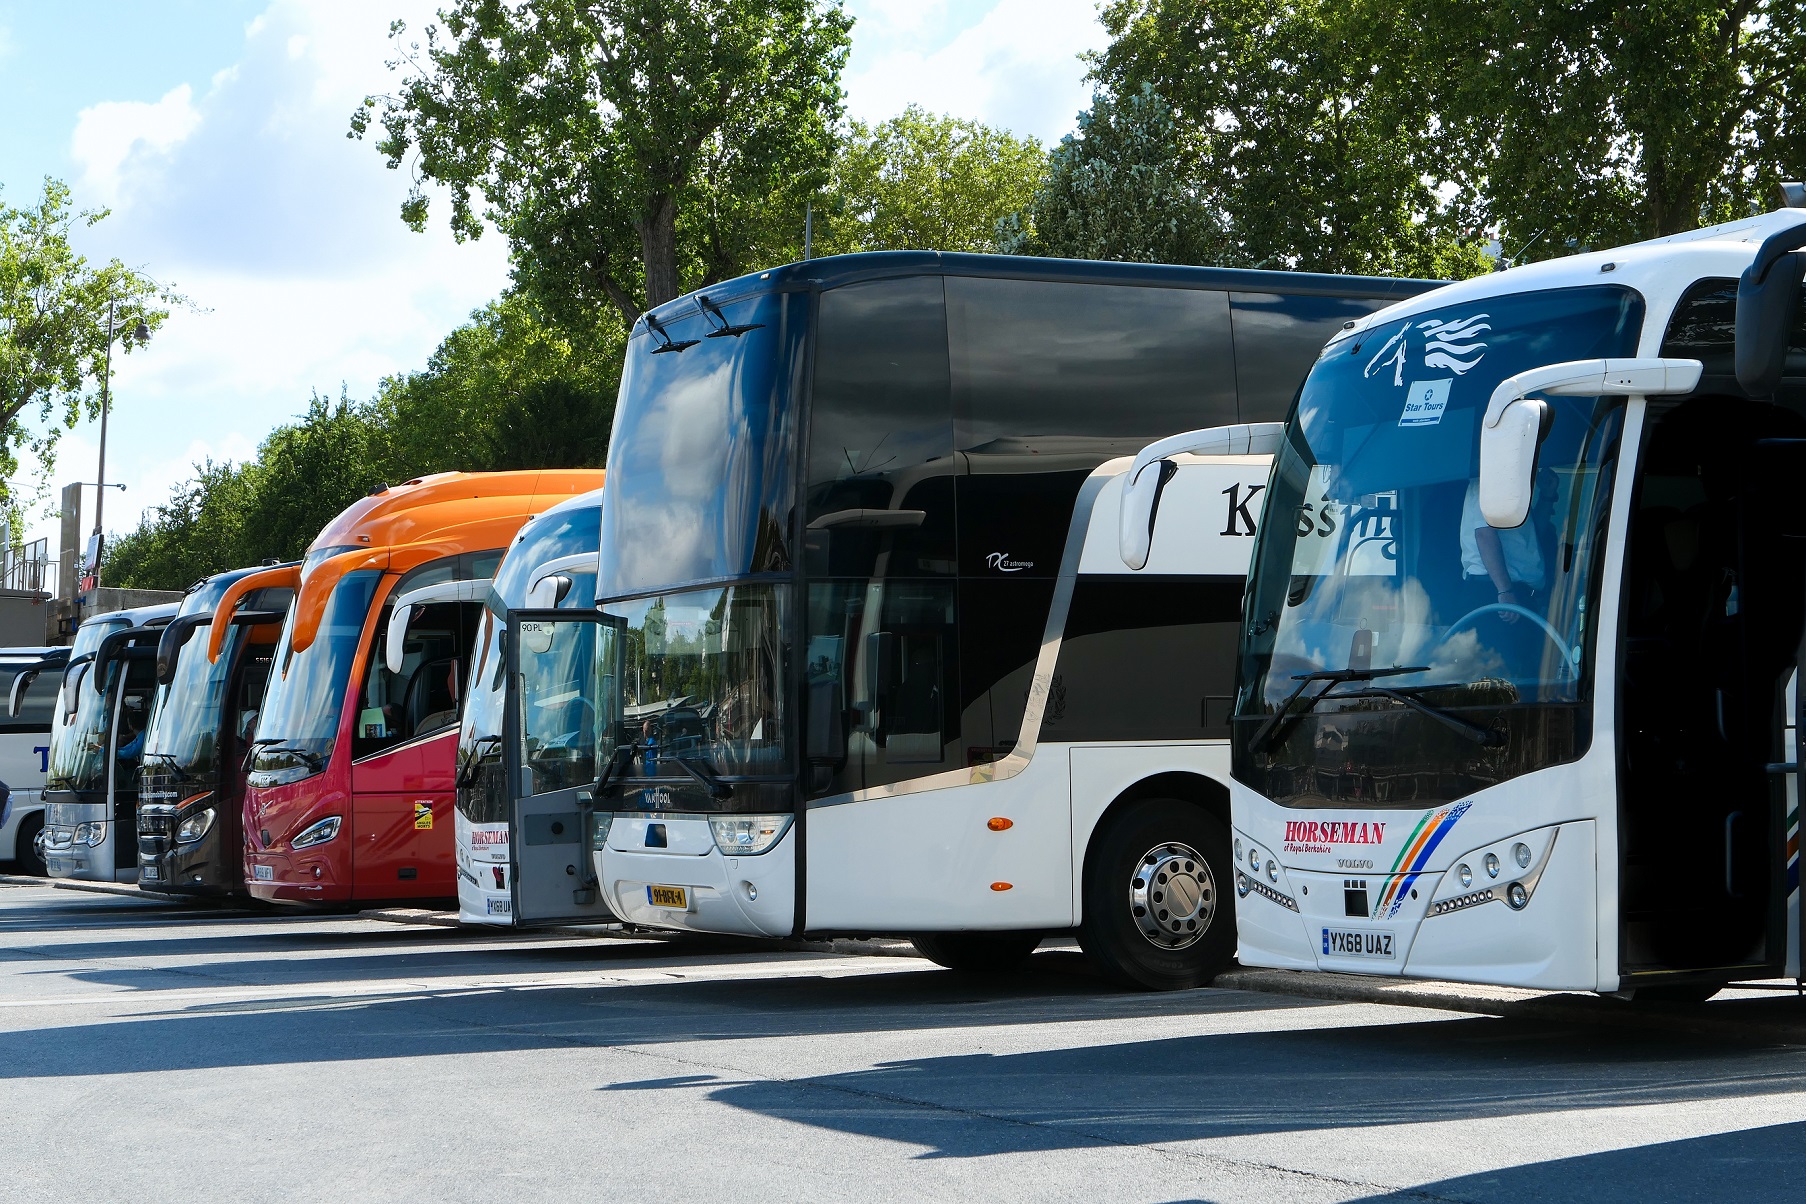 DfT proposes partial removal of 50km limit on youngest PCV drivers